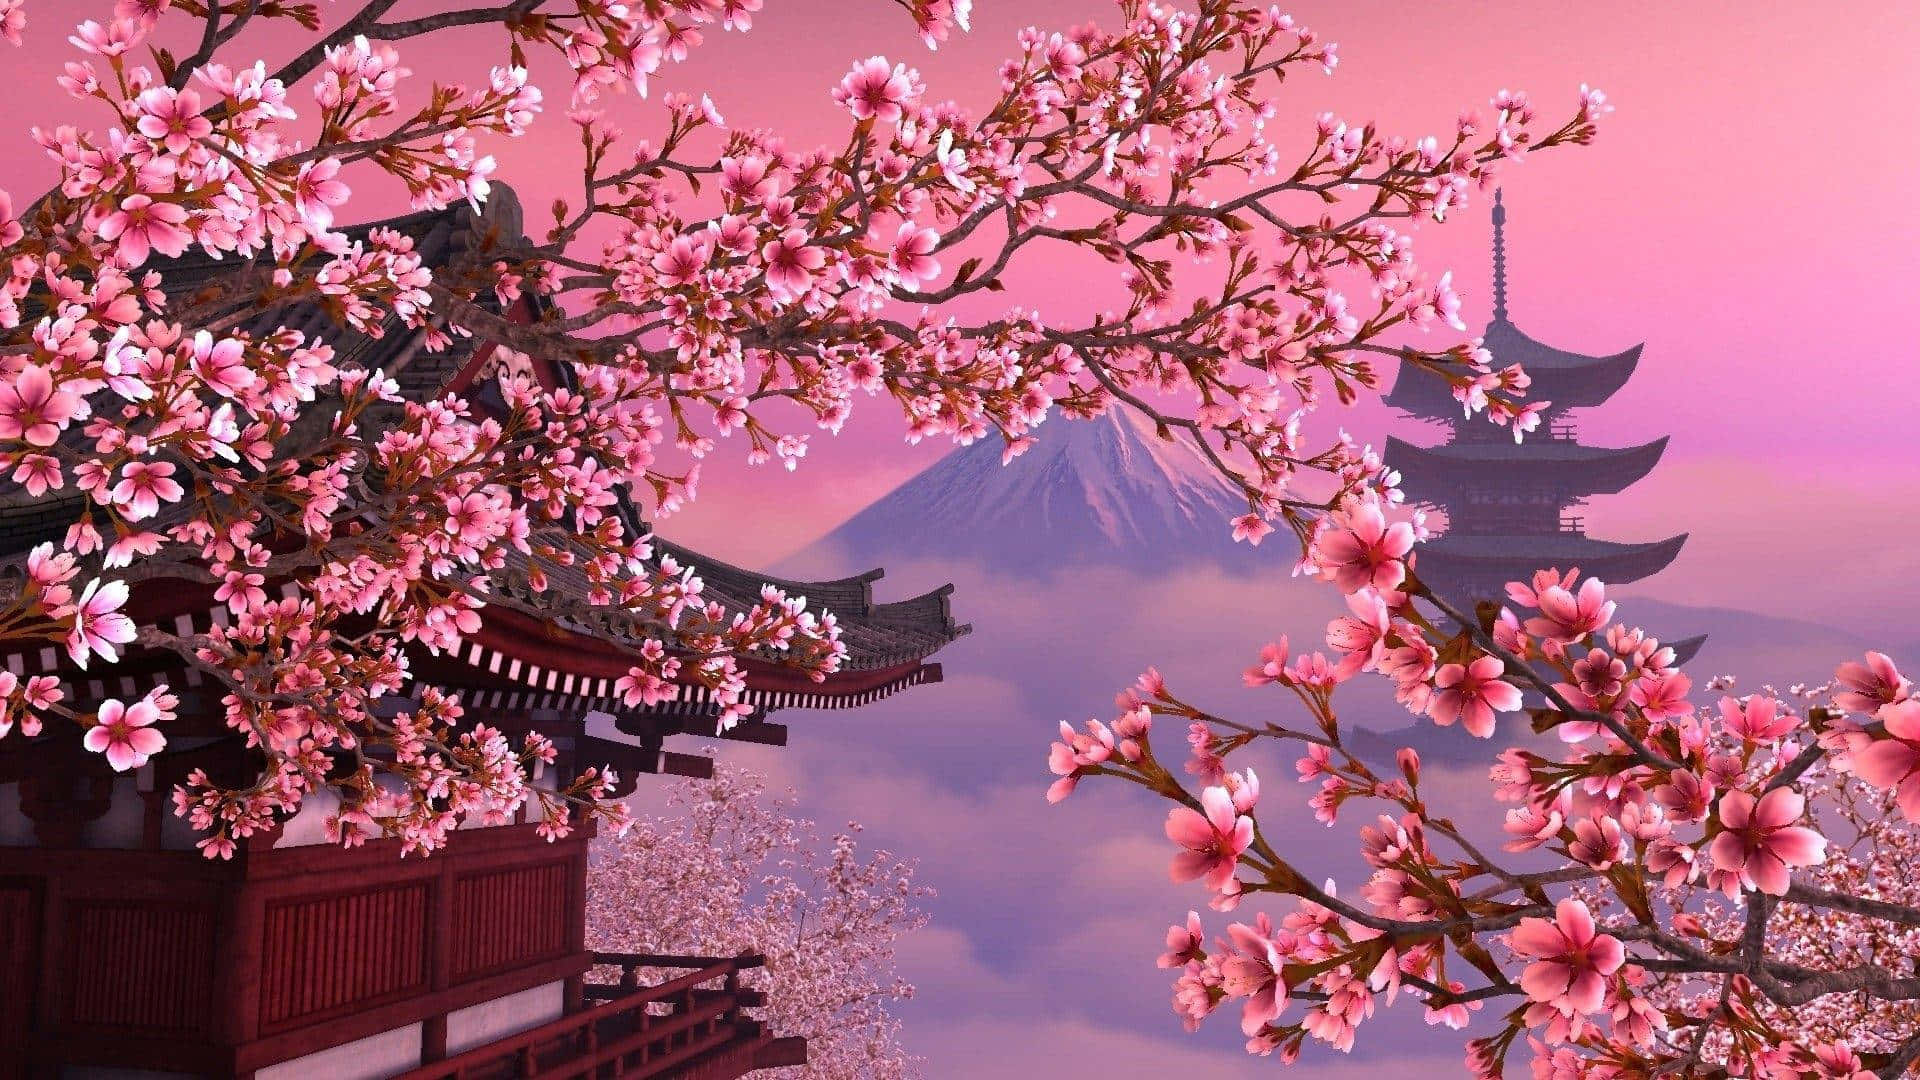 "Explore the dreamy world of pastel pink anime aesthetic" Wallpaper